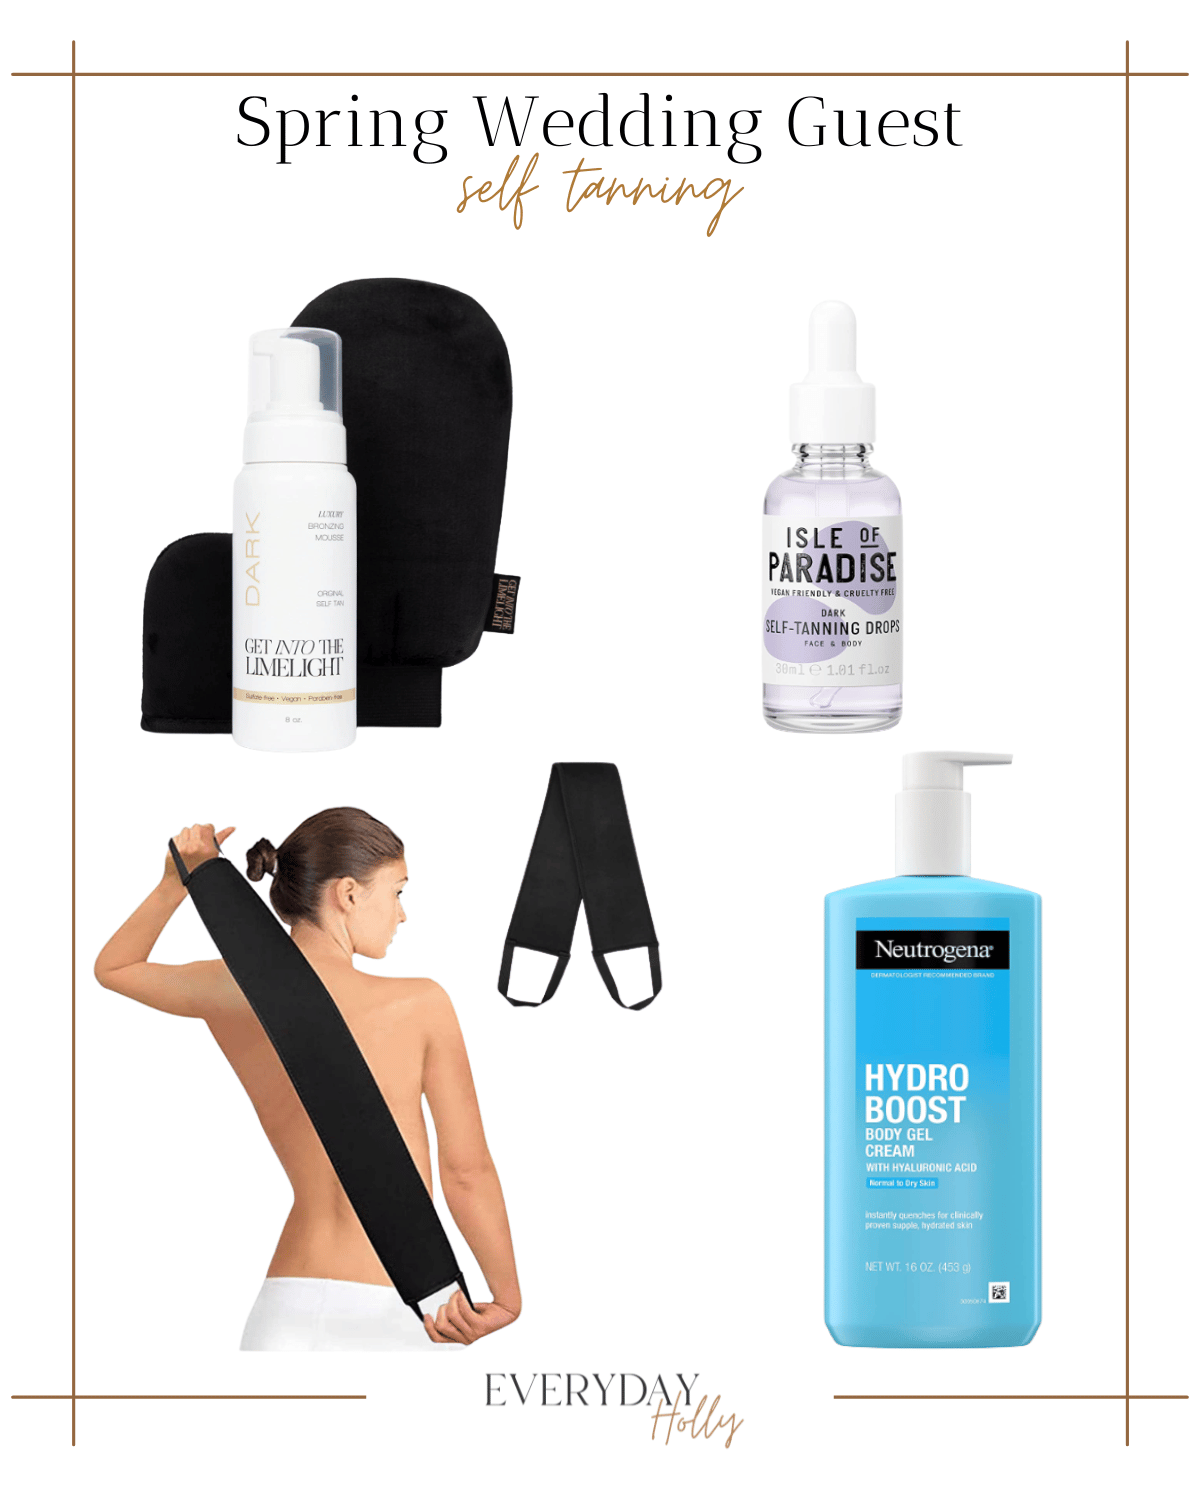 self tanning essentials, self tanner, isle of paradise drops, get into the limelight self tanner, self tanning kit, wedding guest essentials 